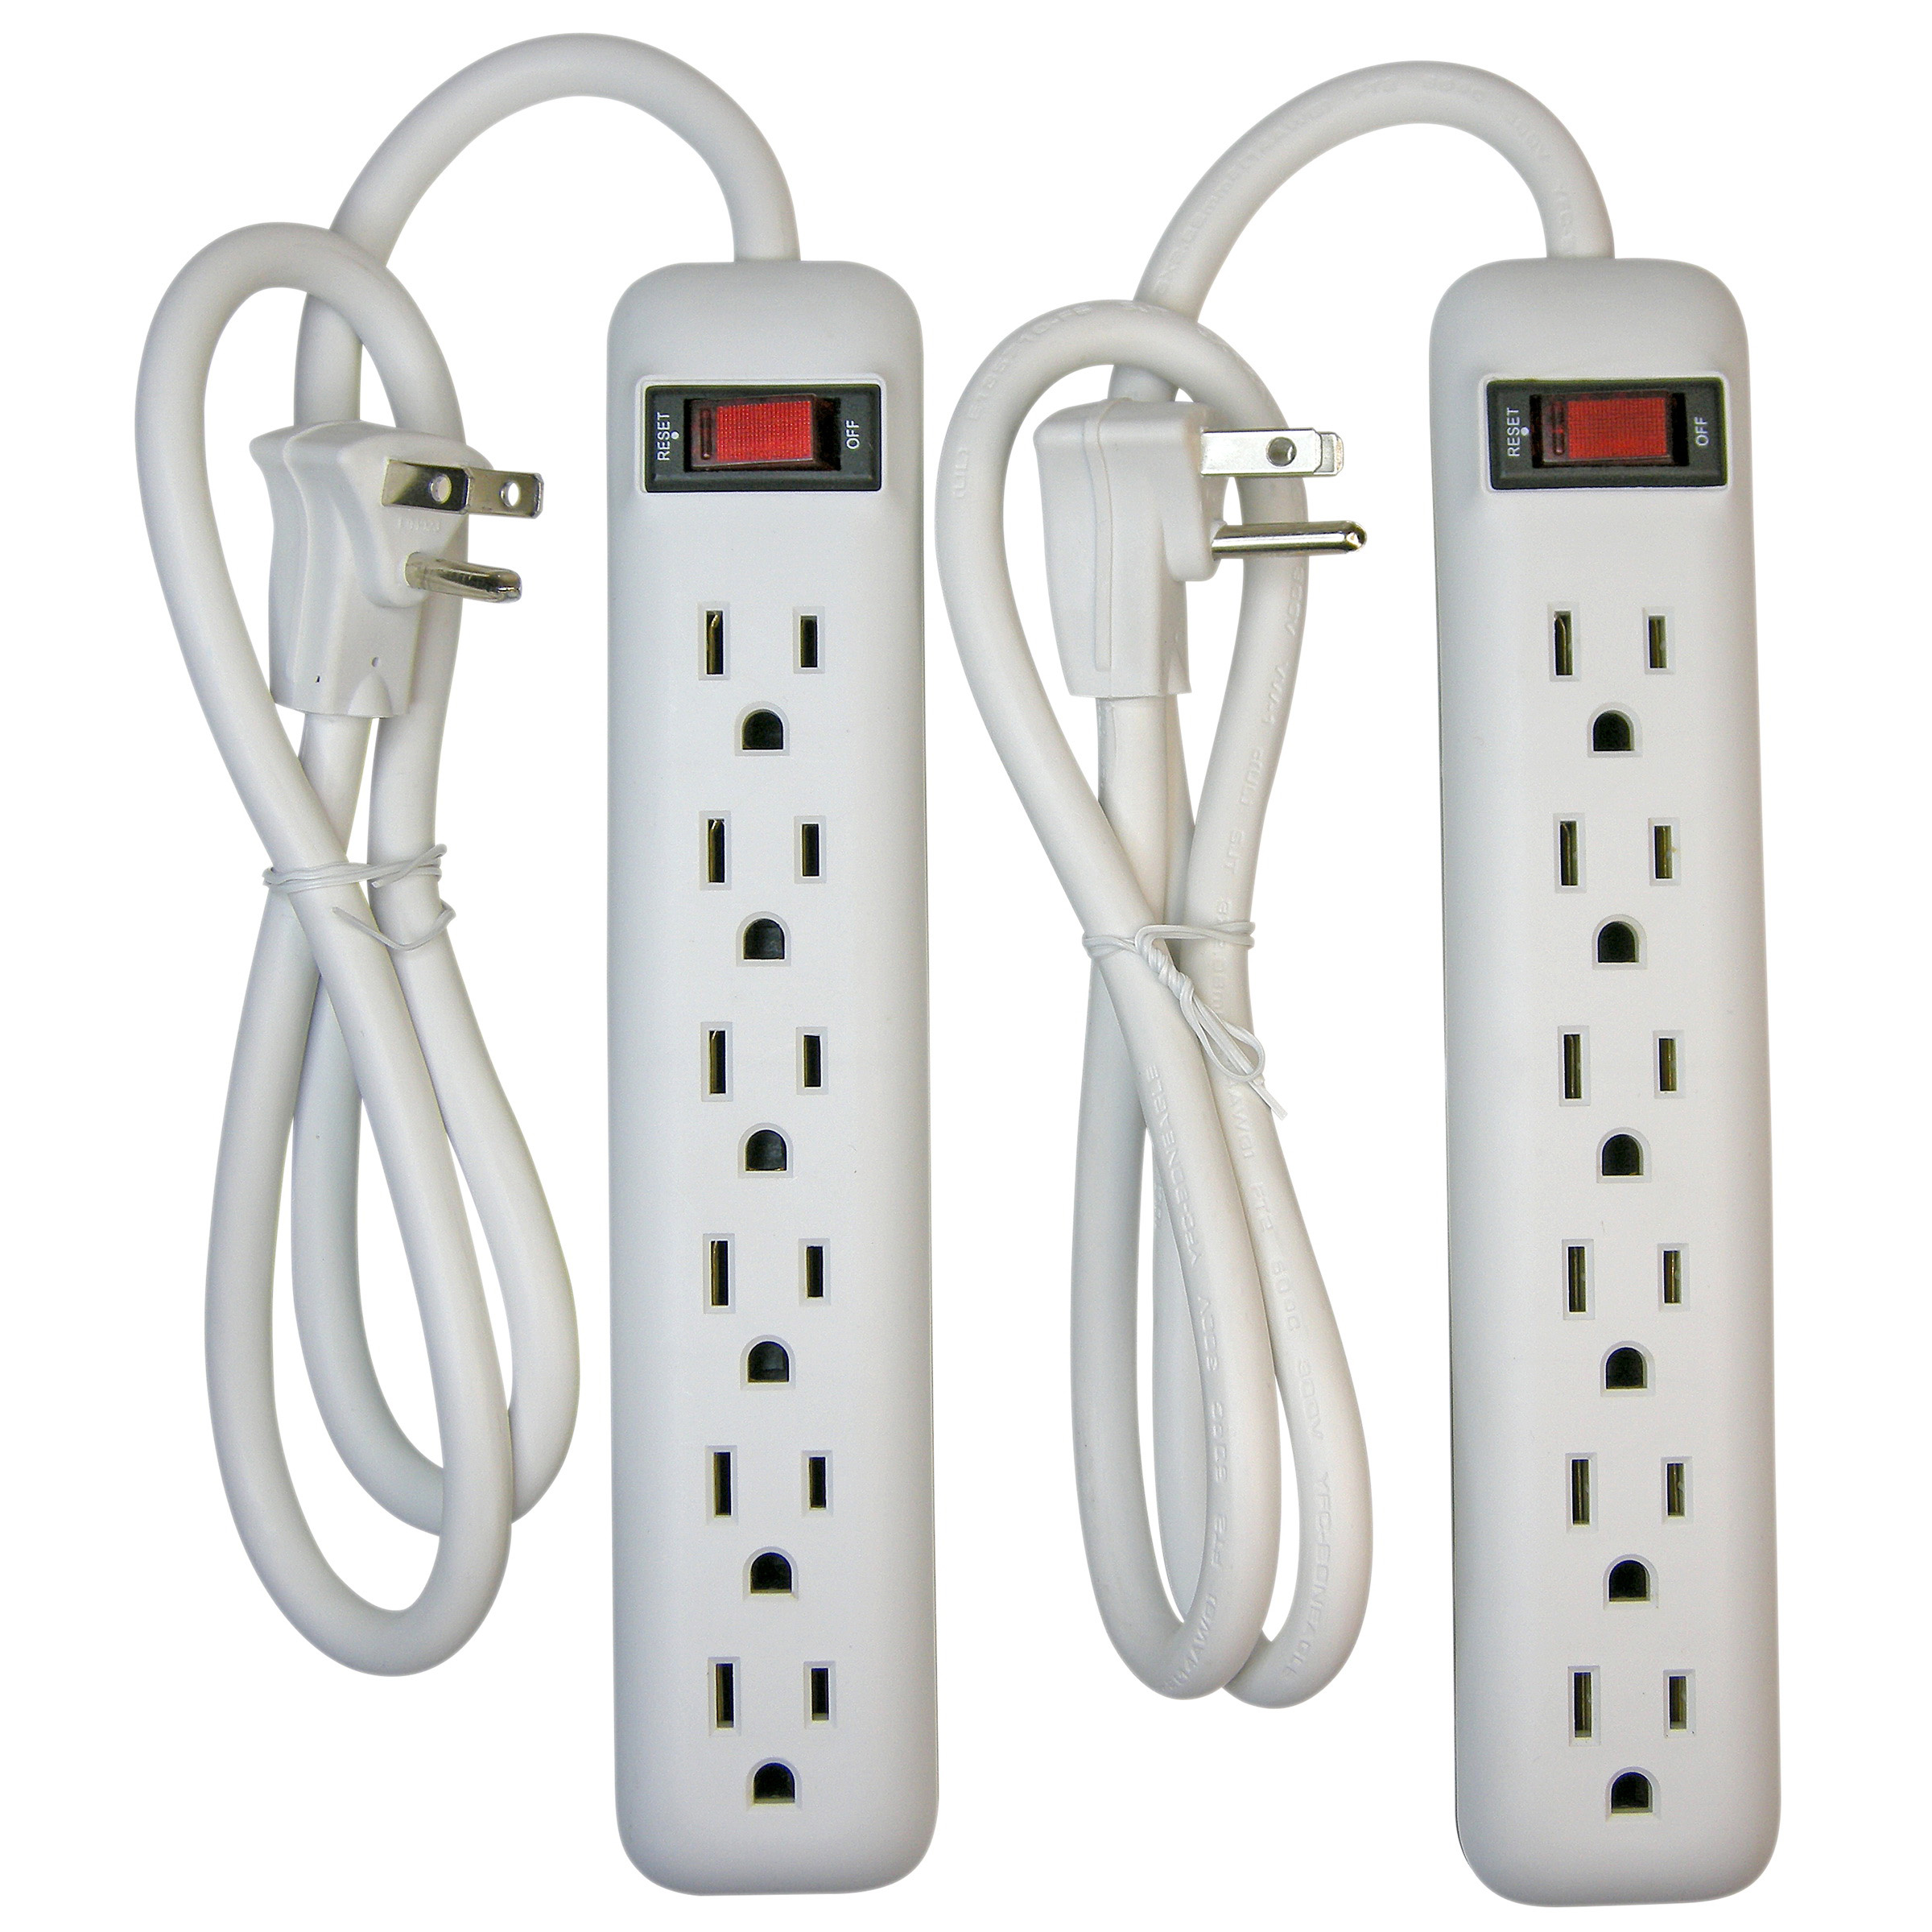 PowerZone OR7000X2 Power Outlet Strip, 6 -Socket, 15 A, 125 V - 1